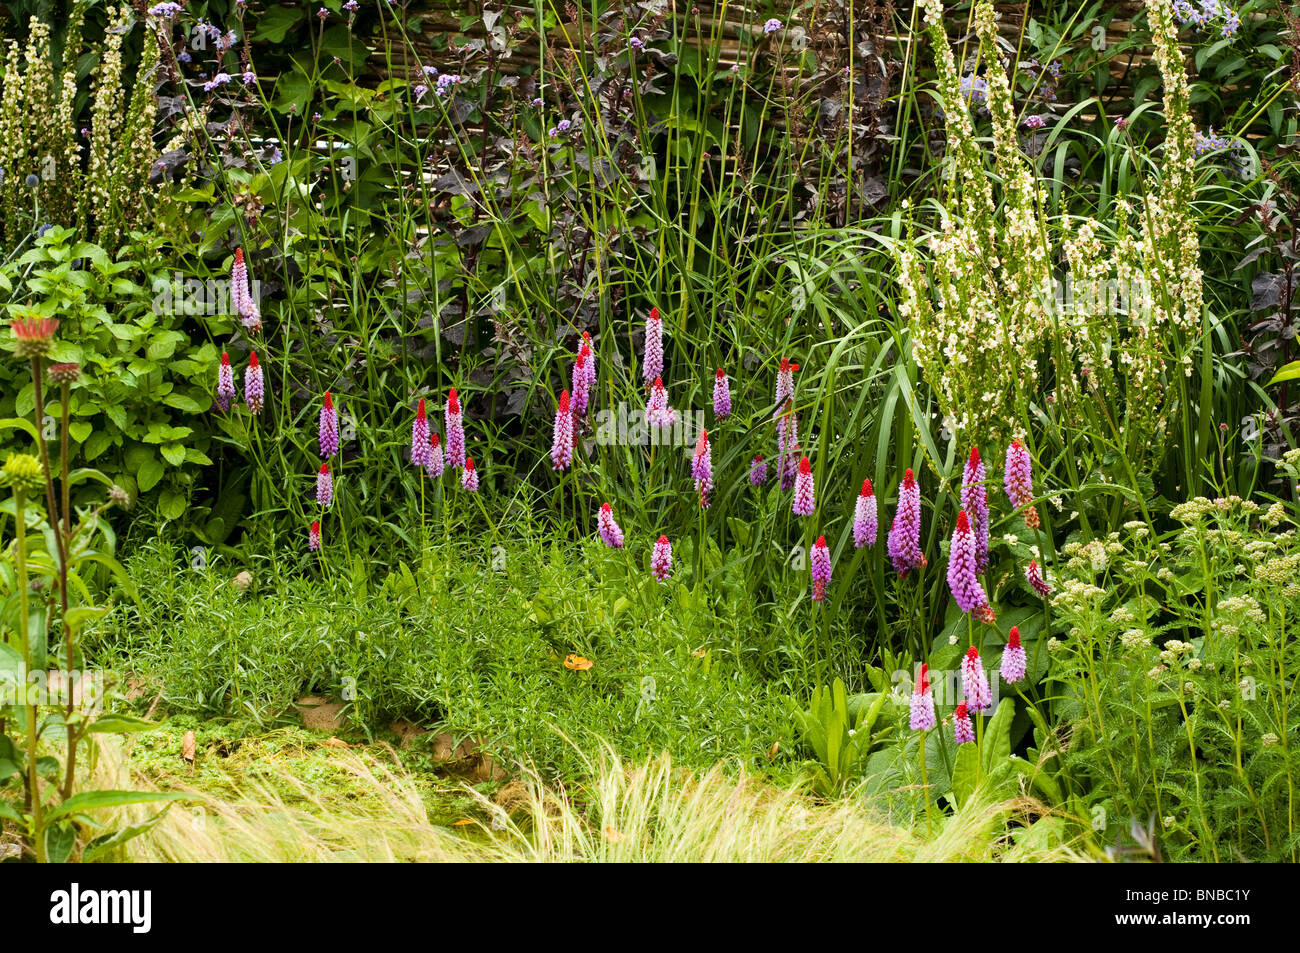 'It's Only Natural' show garden at Hampton Court Flower Show 2010, London, United Kingdom Stock Photo